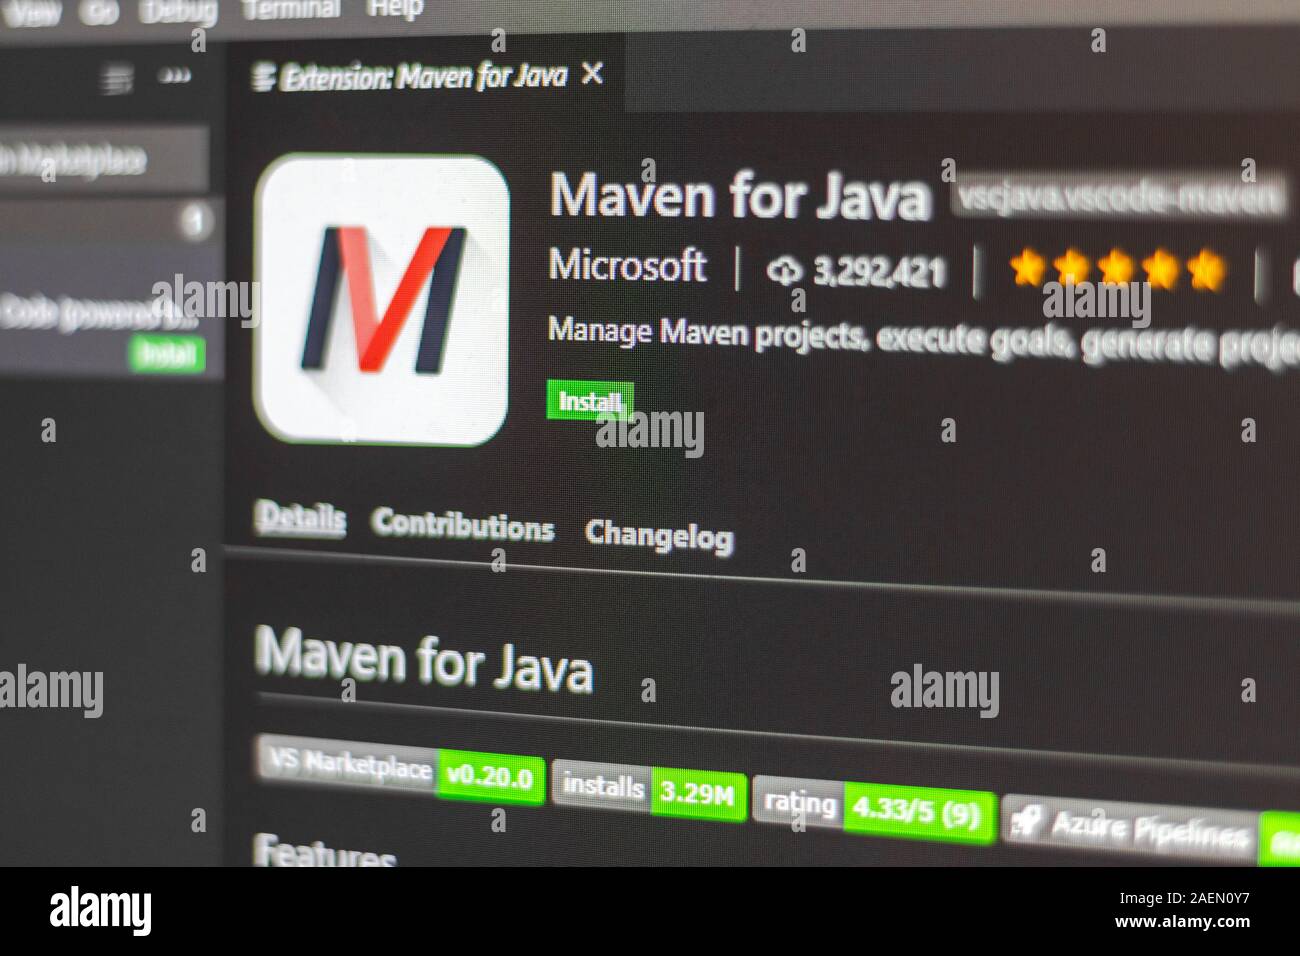 Maven for java extension for visual studio code Stock Photo